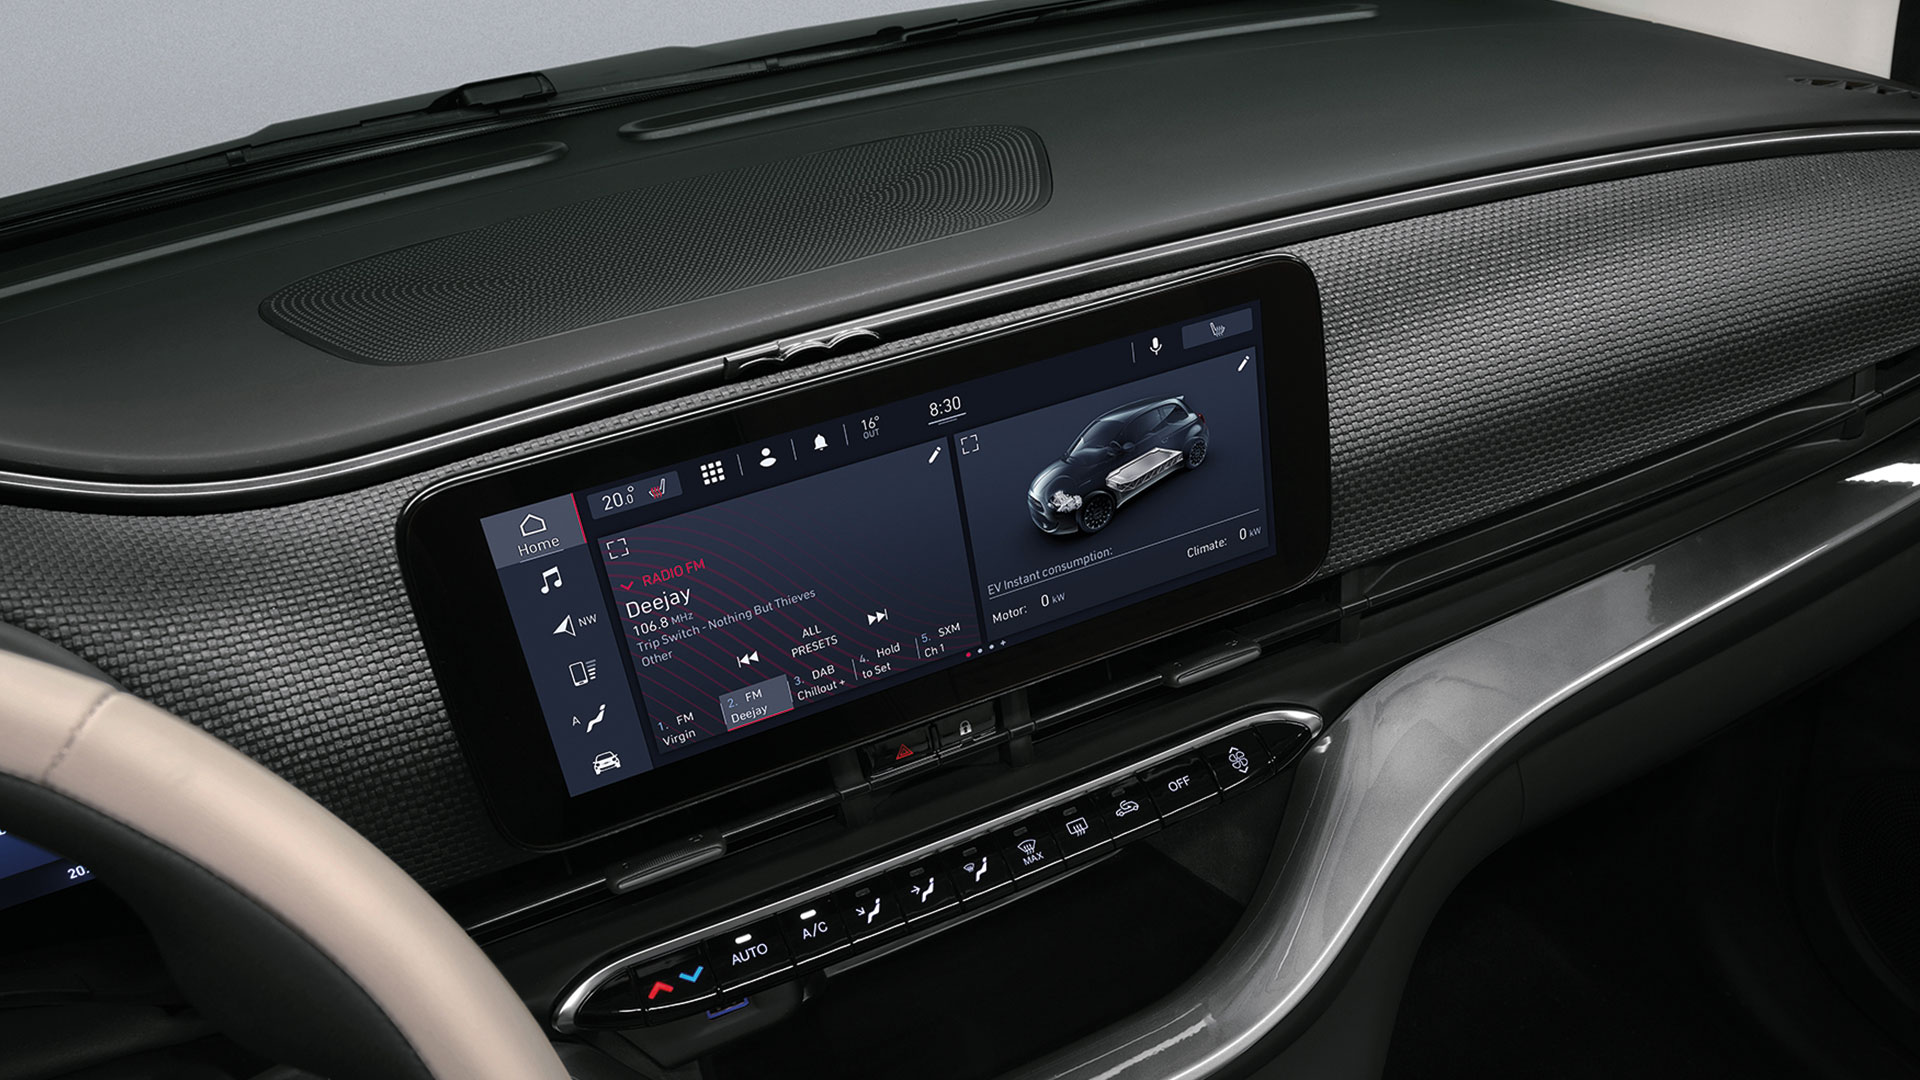 10.25” INFOTAINMENT SYSTEM WITH NAVIGATION